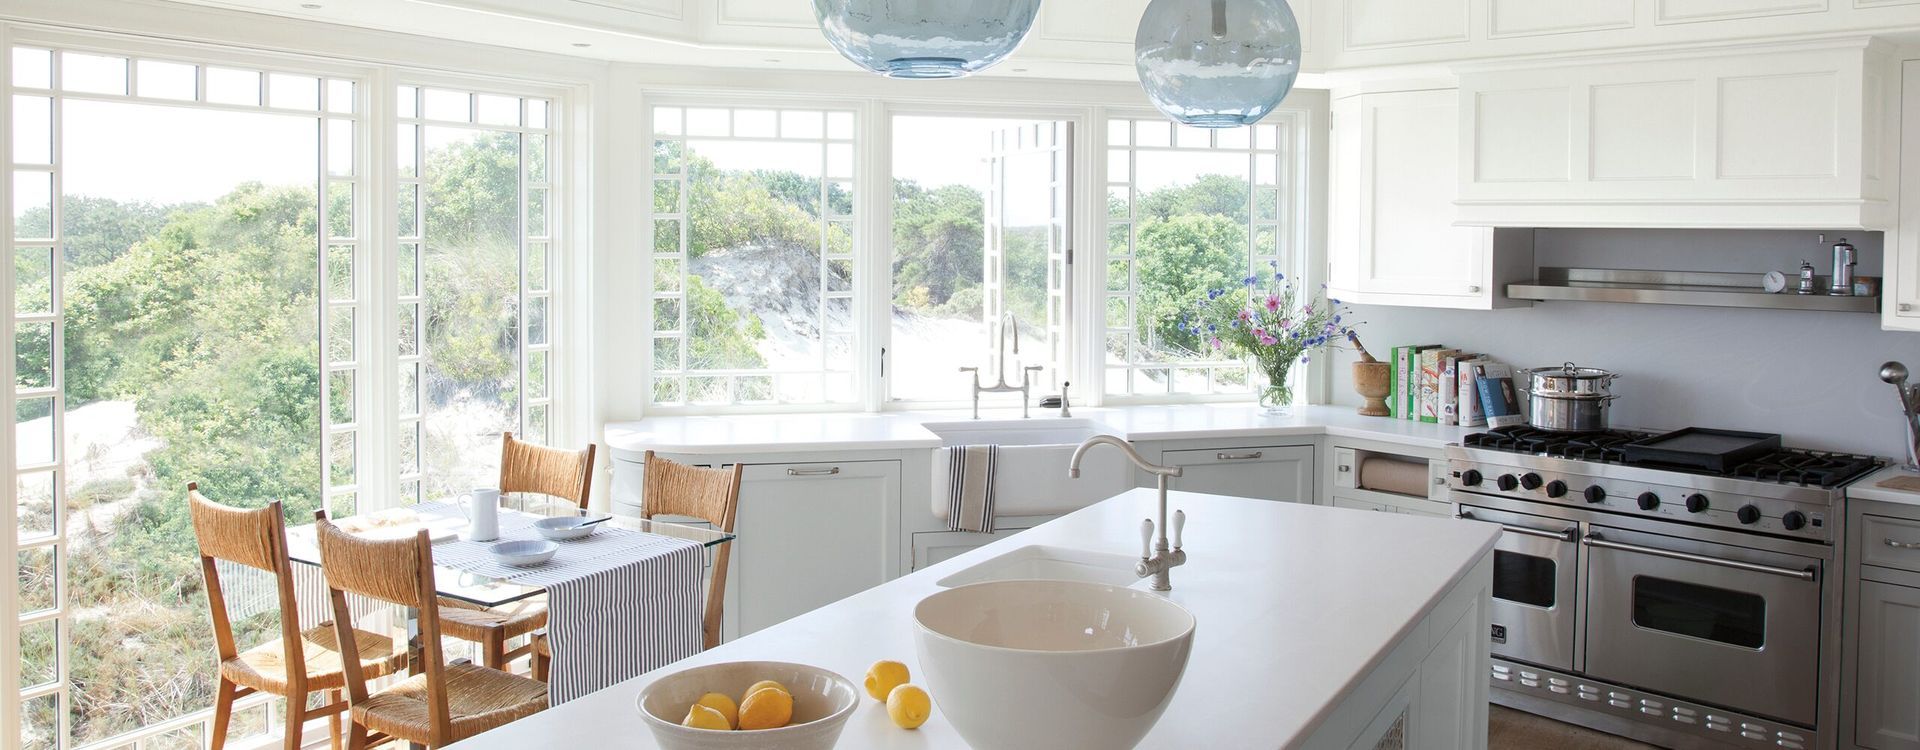 Bright white kitchen with large windows  and white cabinets